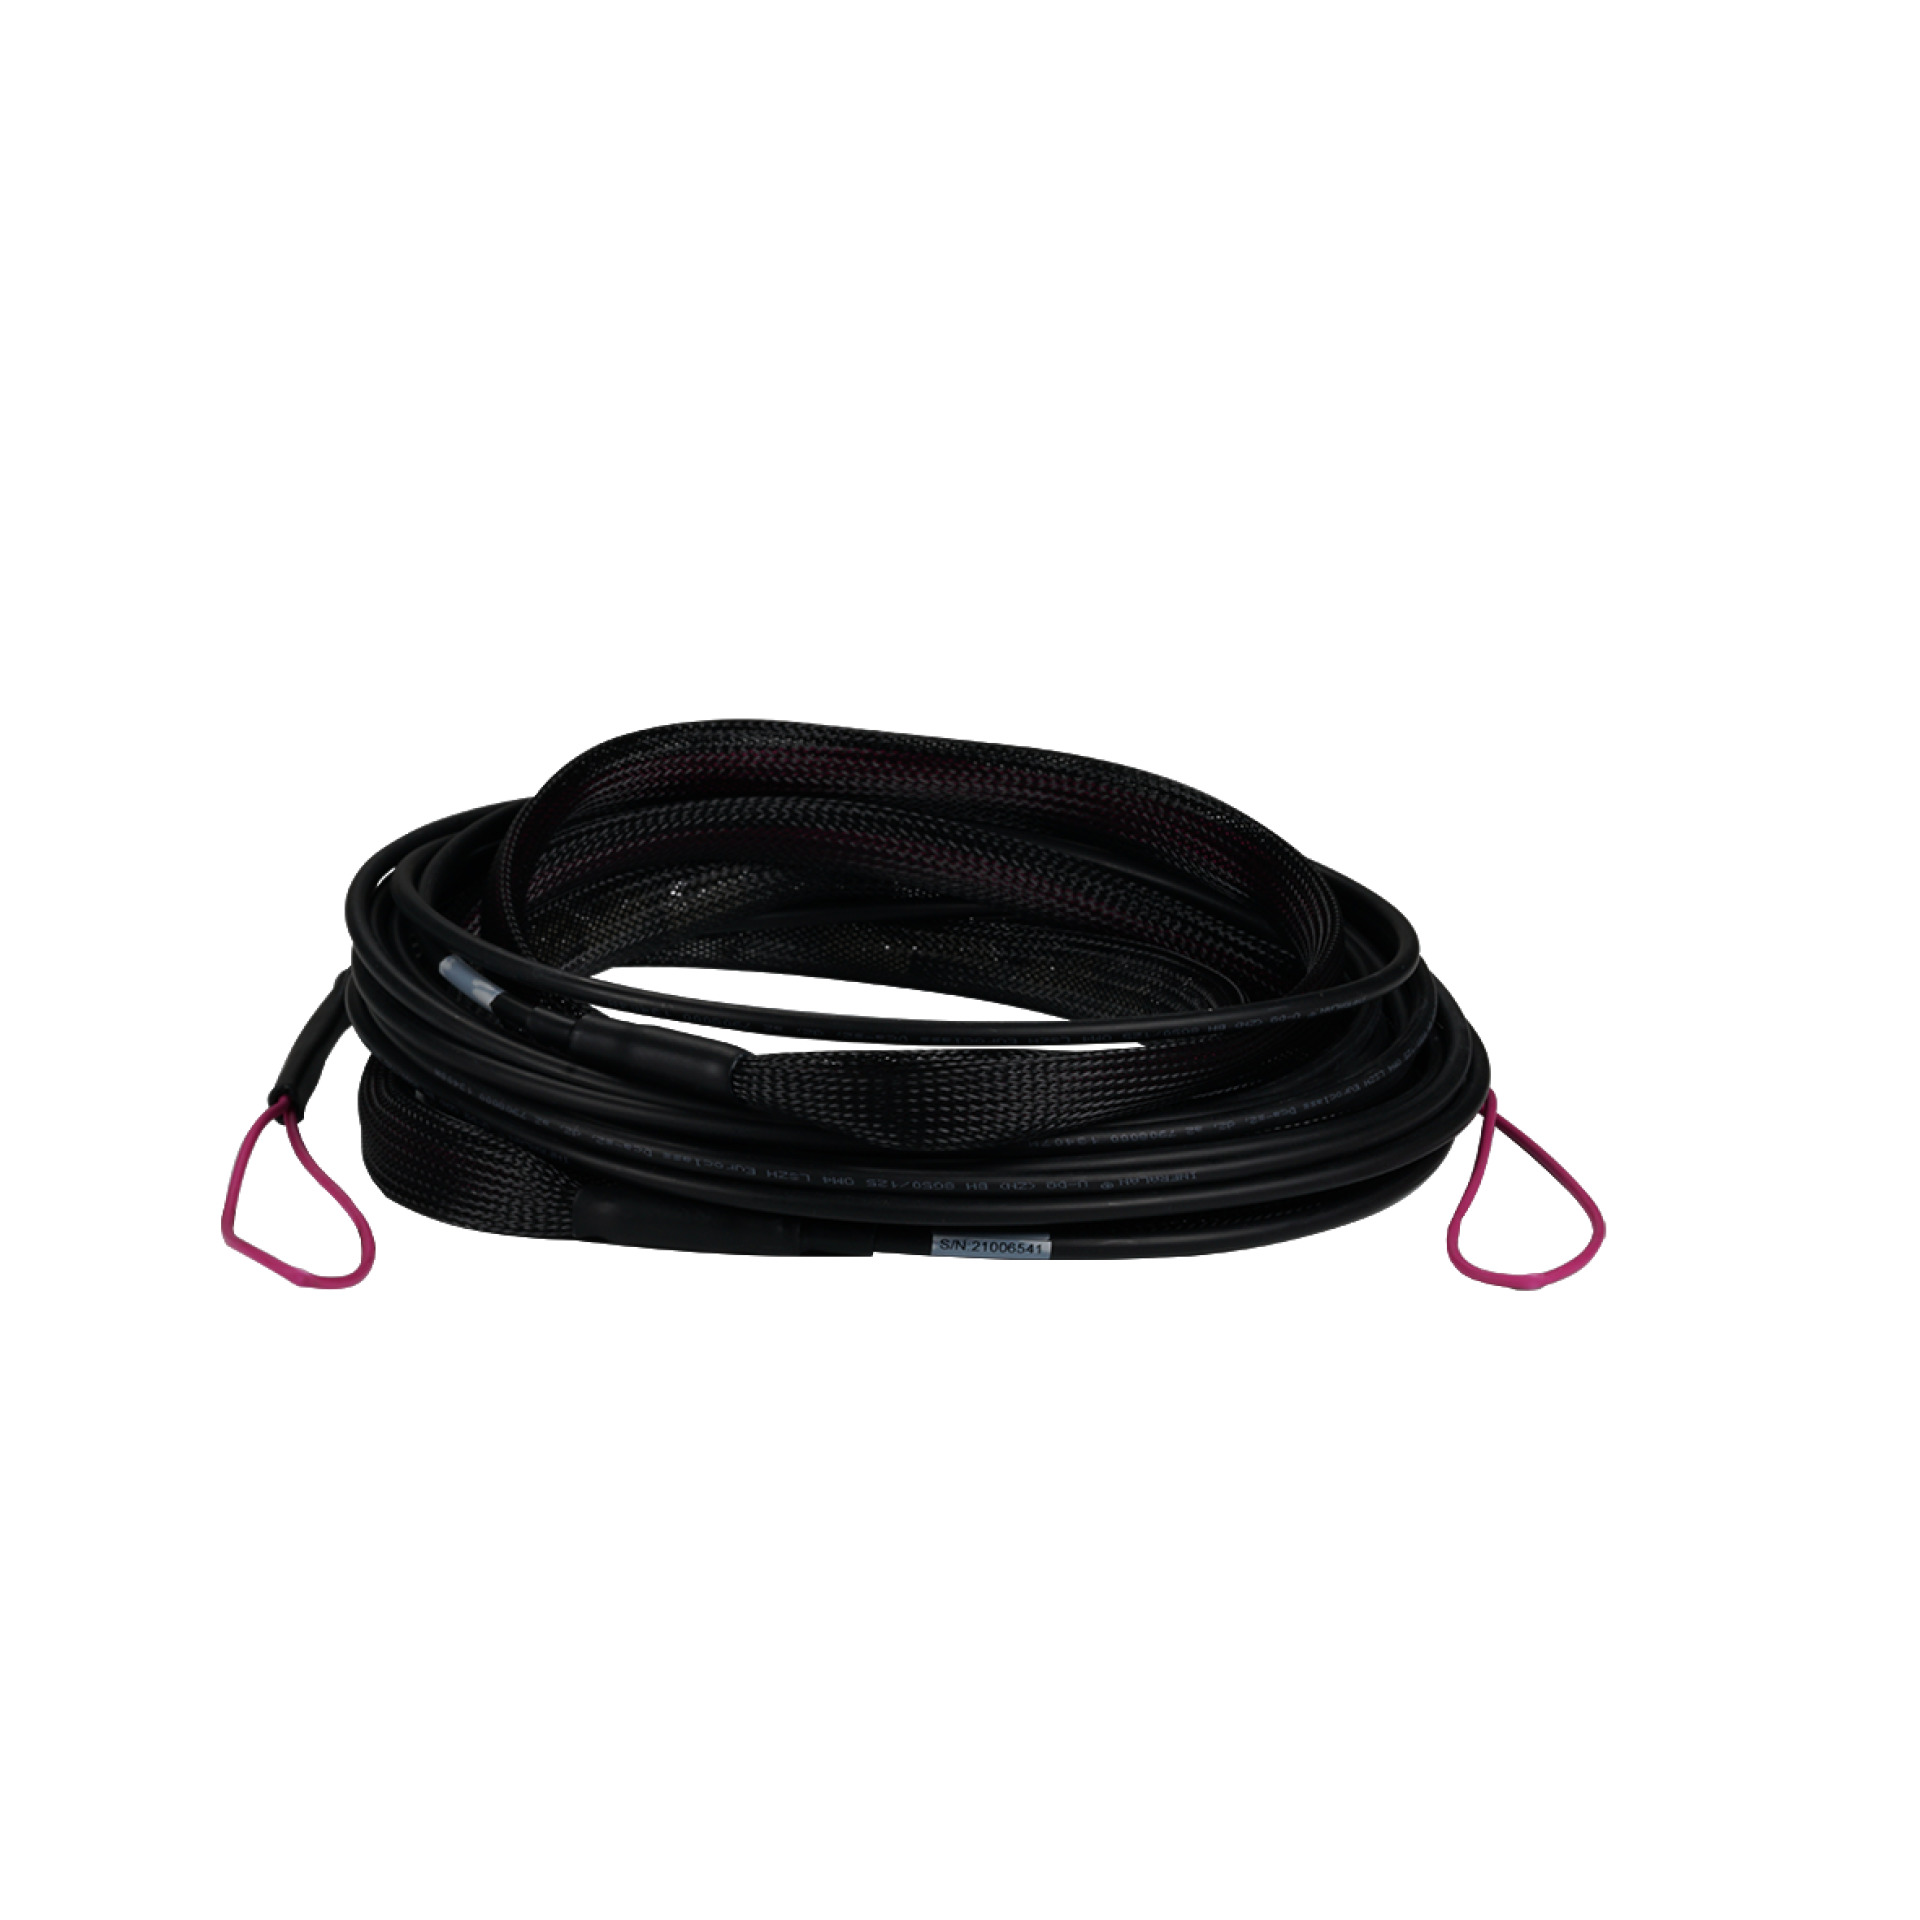 Trunk cable U-DQ(ZN)BH 8G 50/125, SC/SC OM4 10m